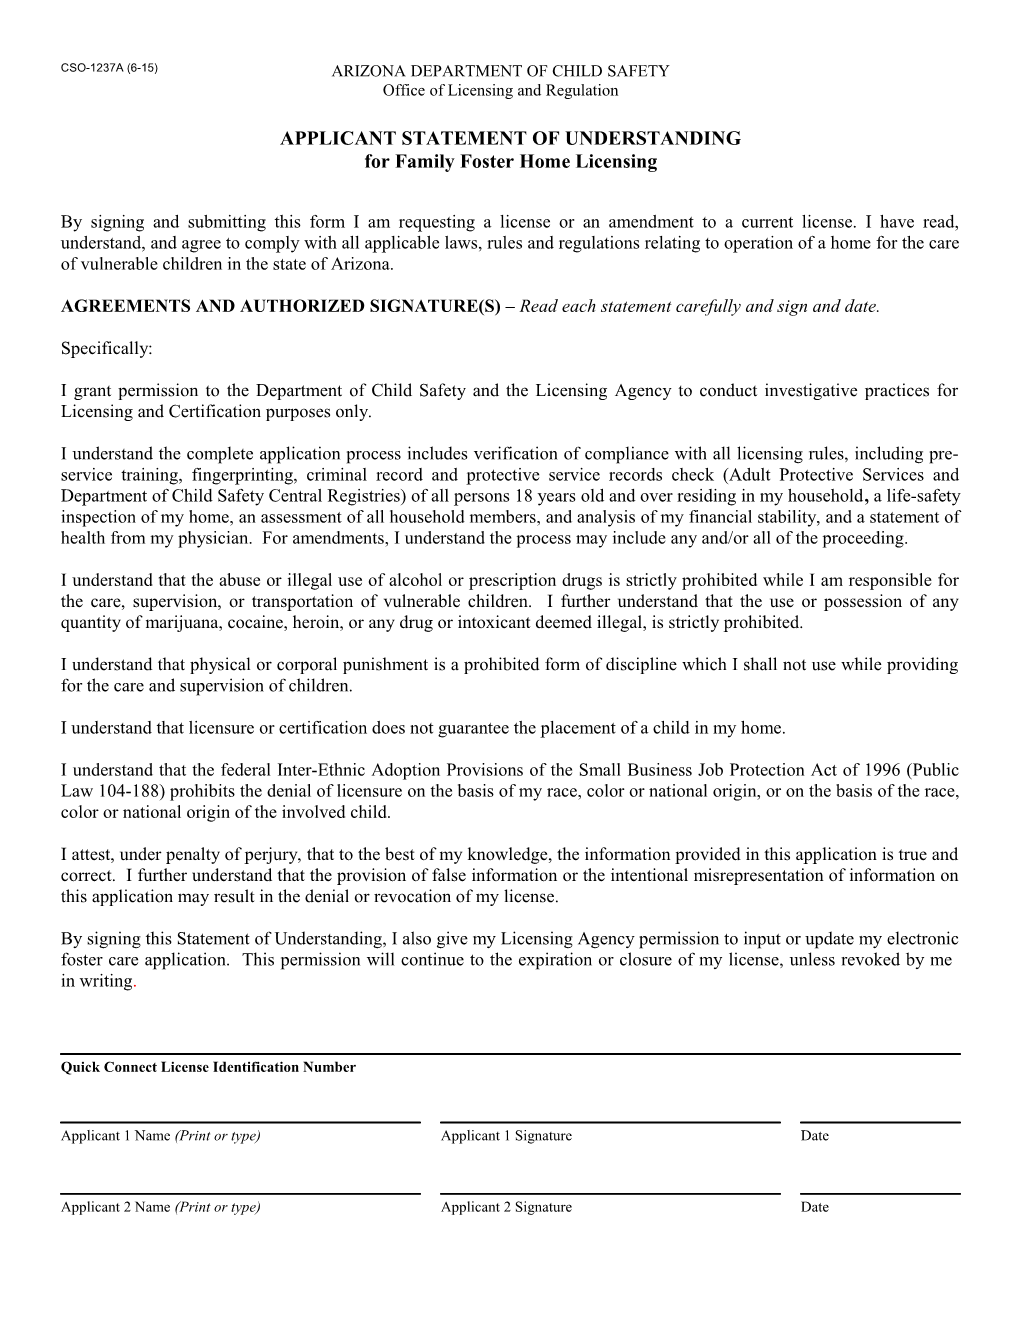 CSO-1237A, Applicant Statement of Understanding for Family Foster Home